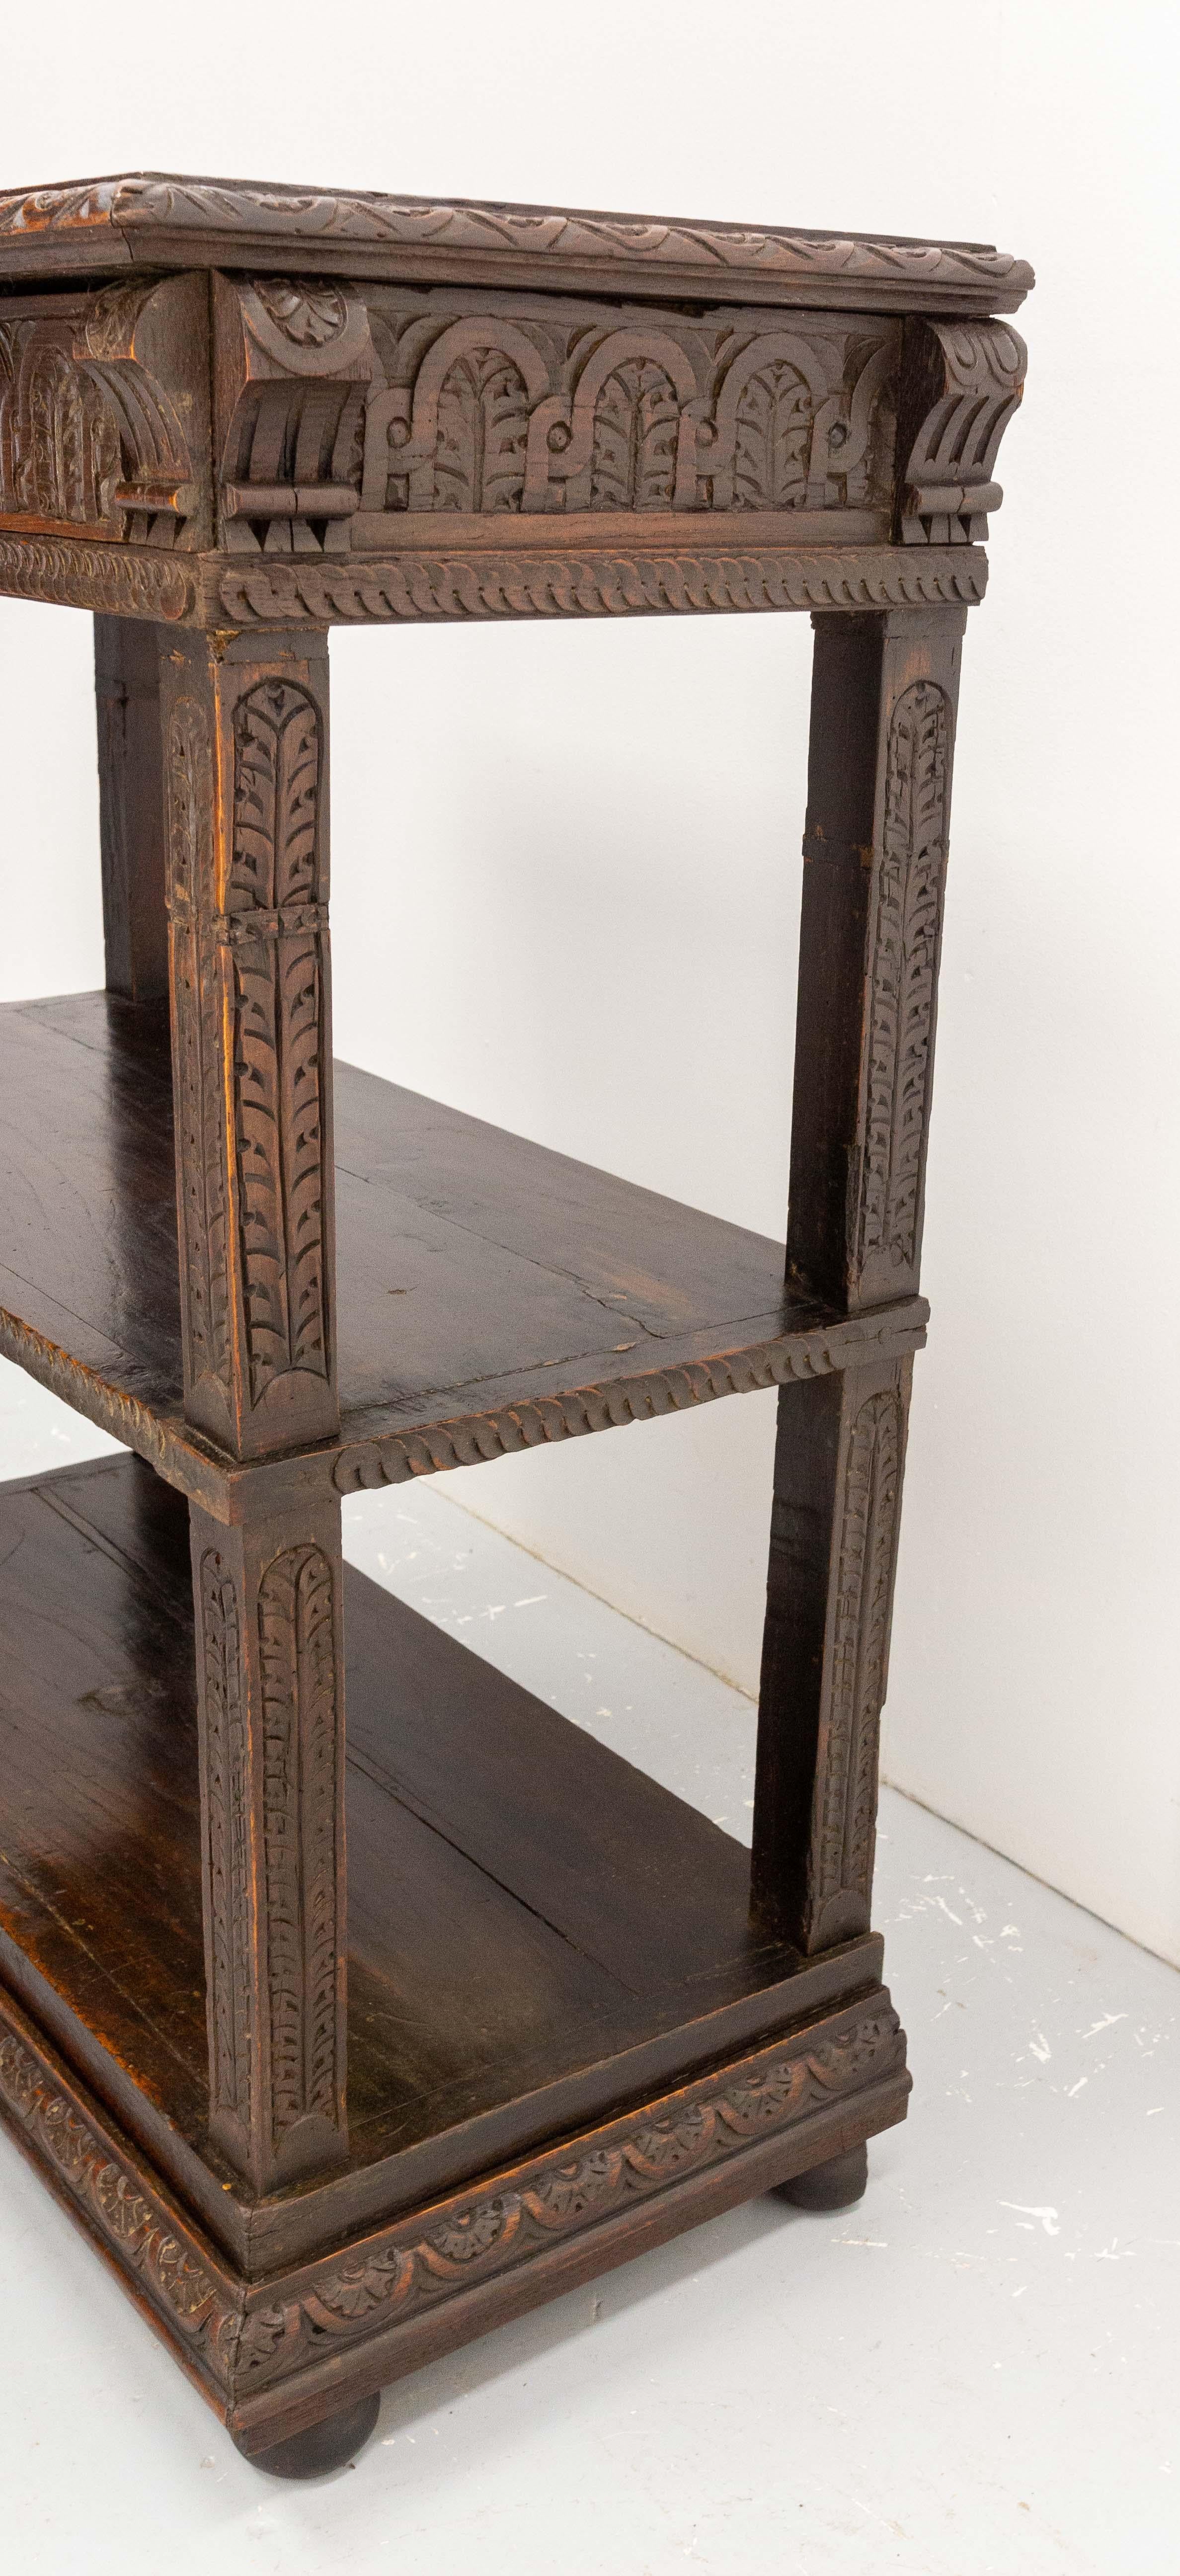 Side Table Hall or Console Oak Table Spanish Colonial Revival, circa 1890 For Sale 2